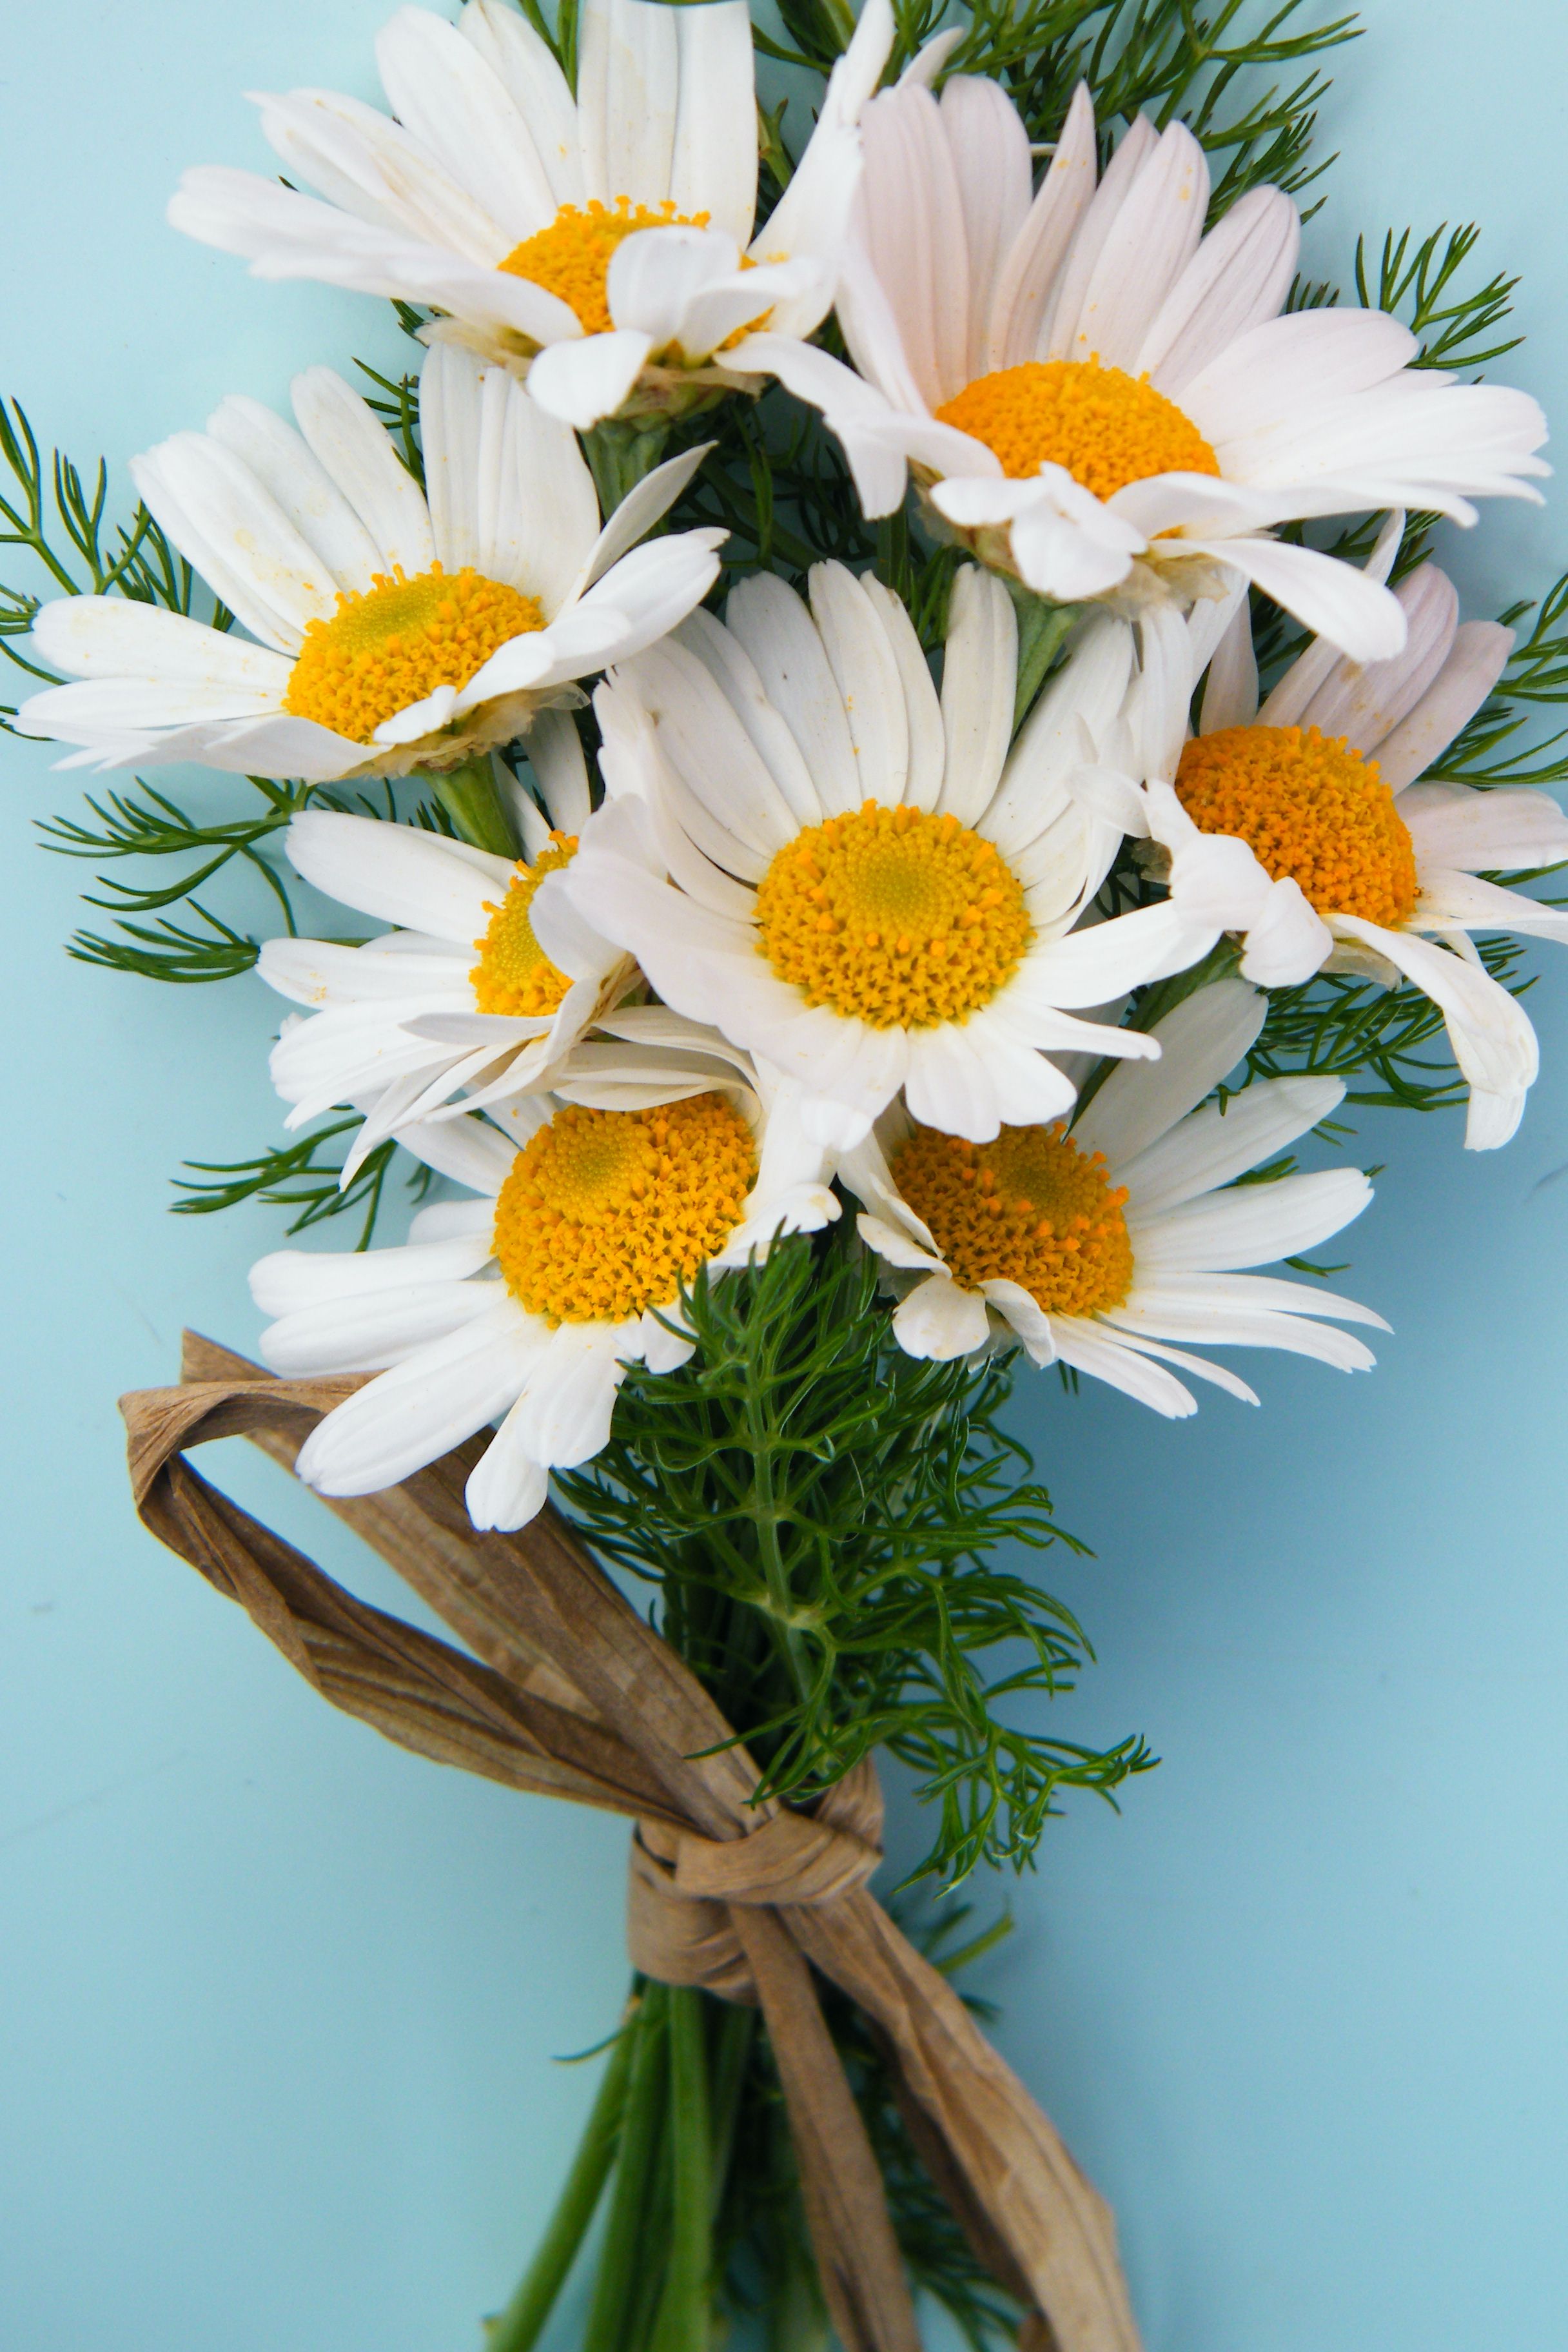 small bunch of daisies | Waltz of the Flowers | Pinterest | Flowers ...